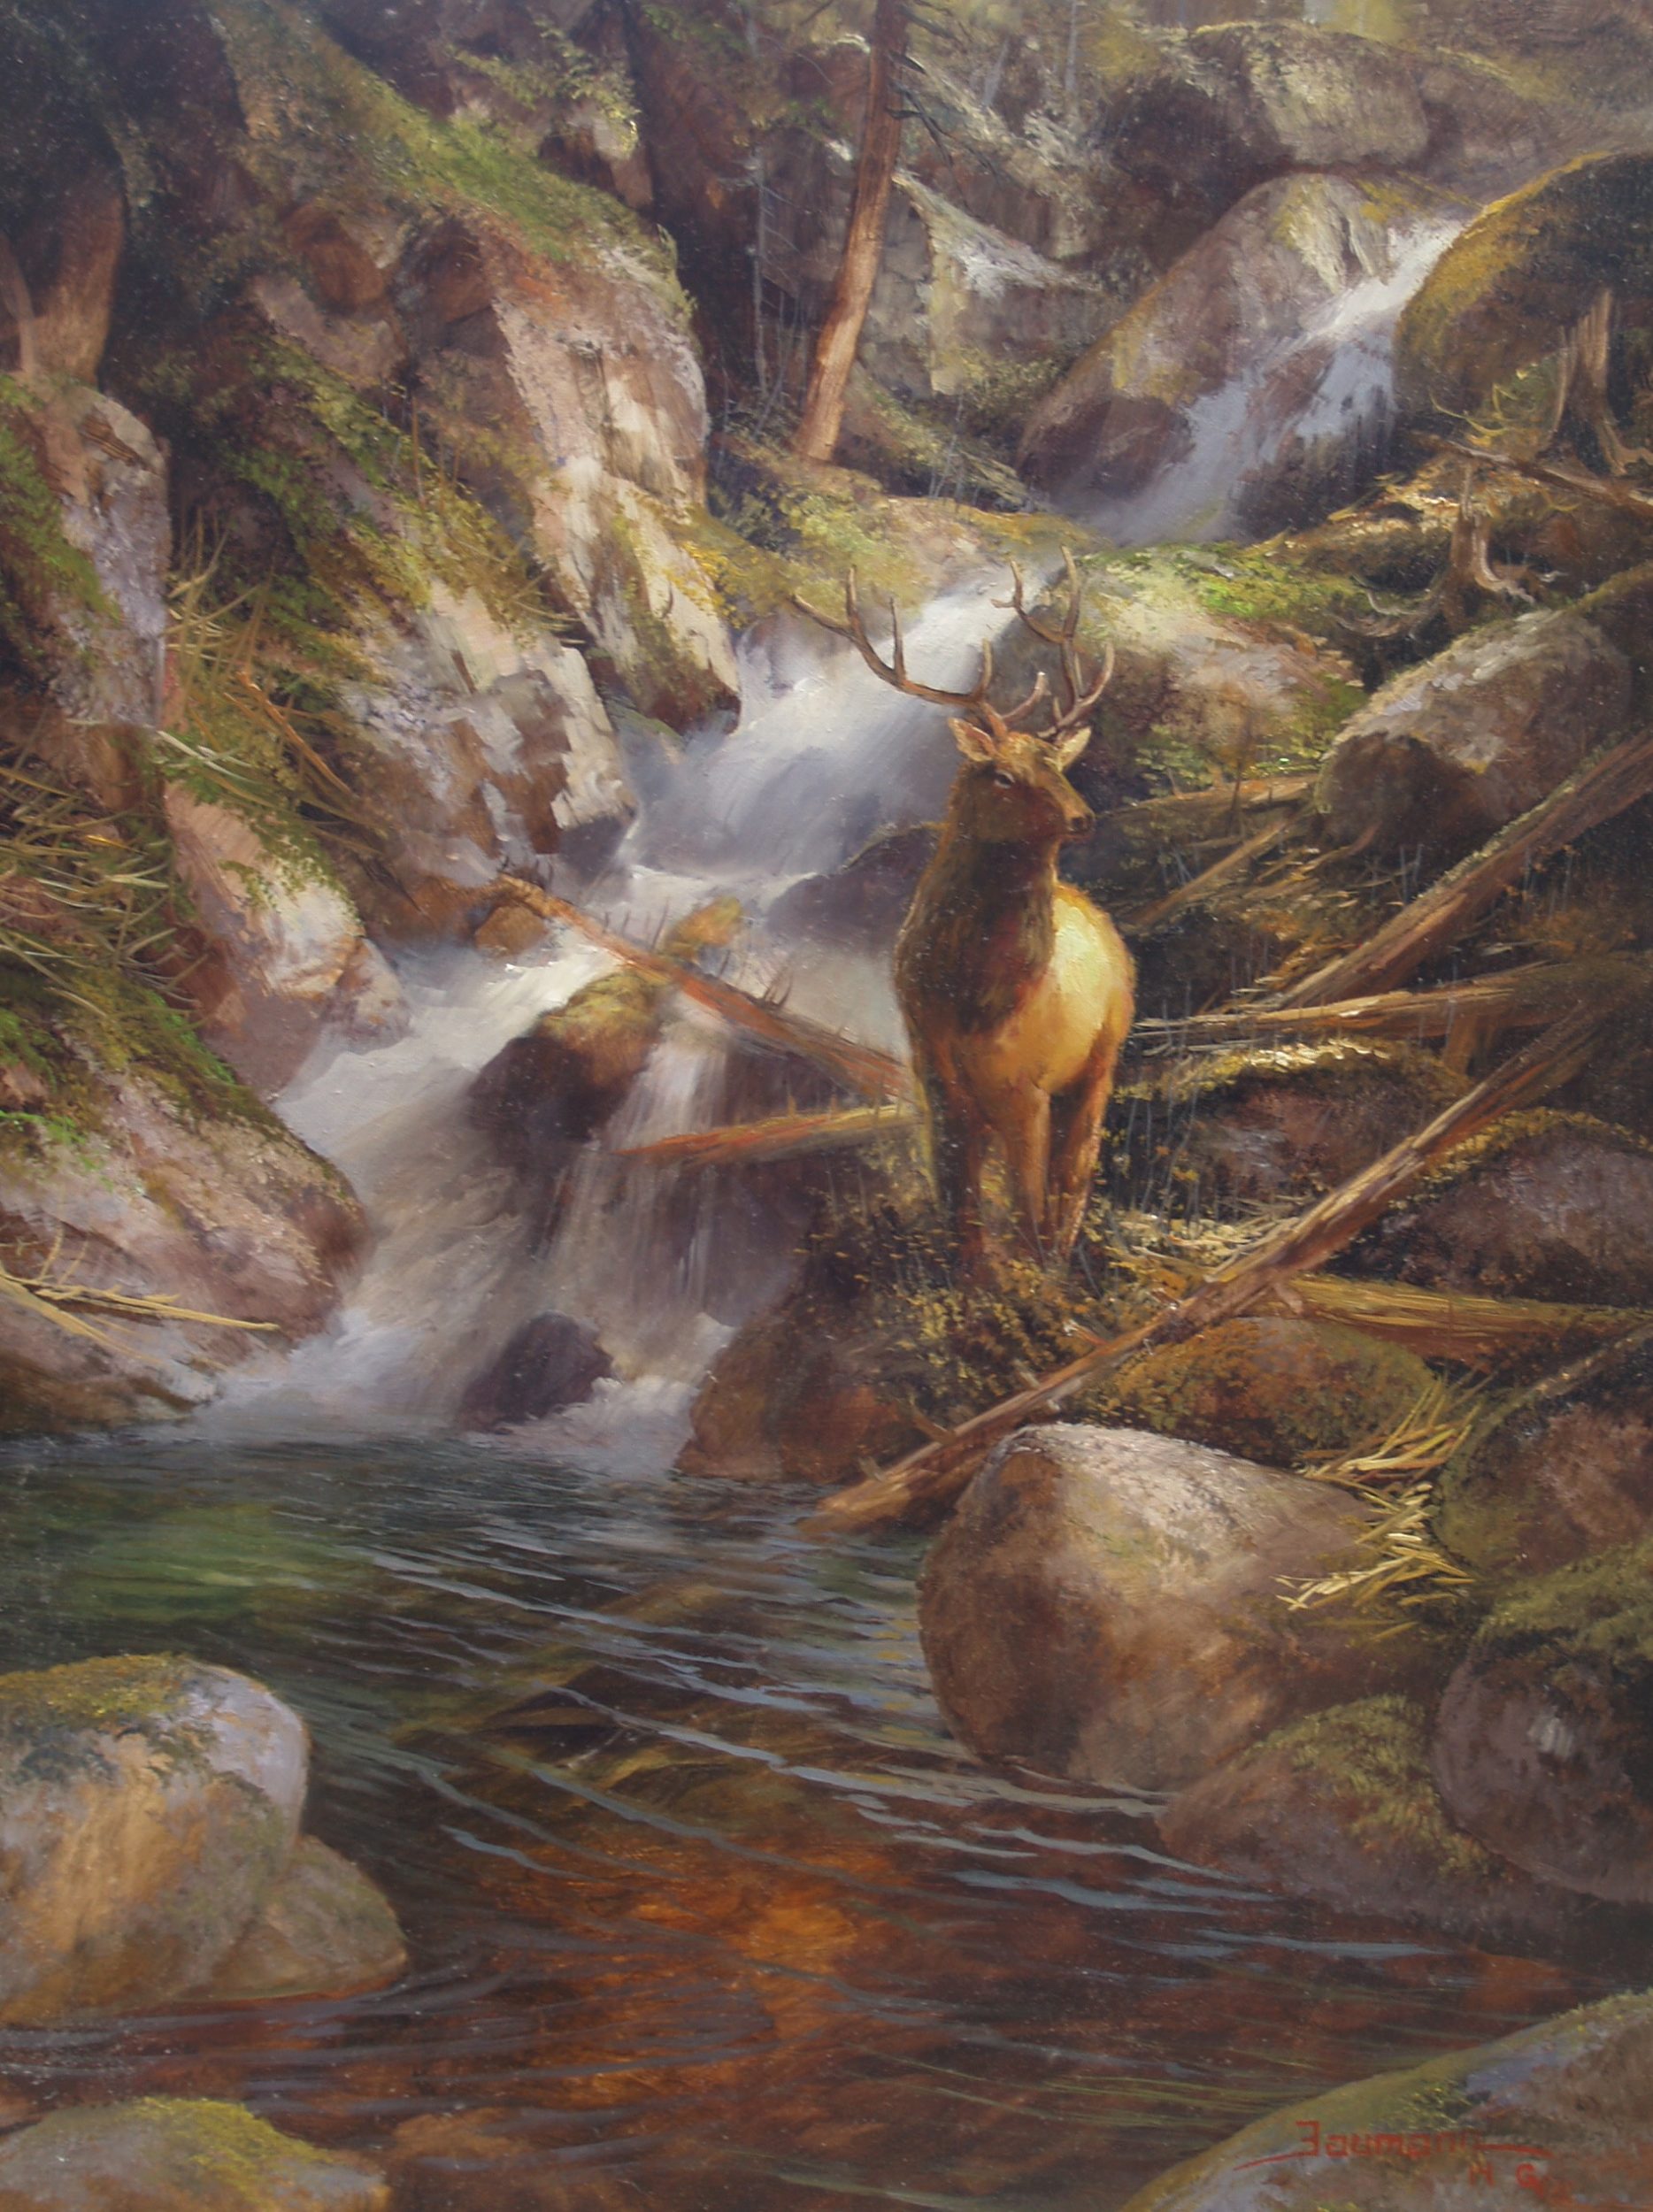 This painting called Wapiti Sanctuary by Stefan Baumann features an Elk called a Wapiti in the pool of a waterfall